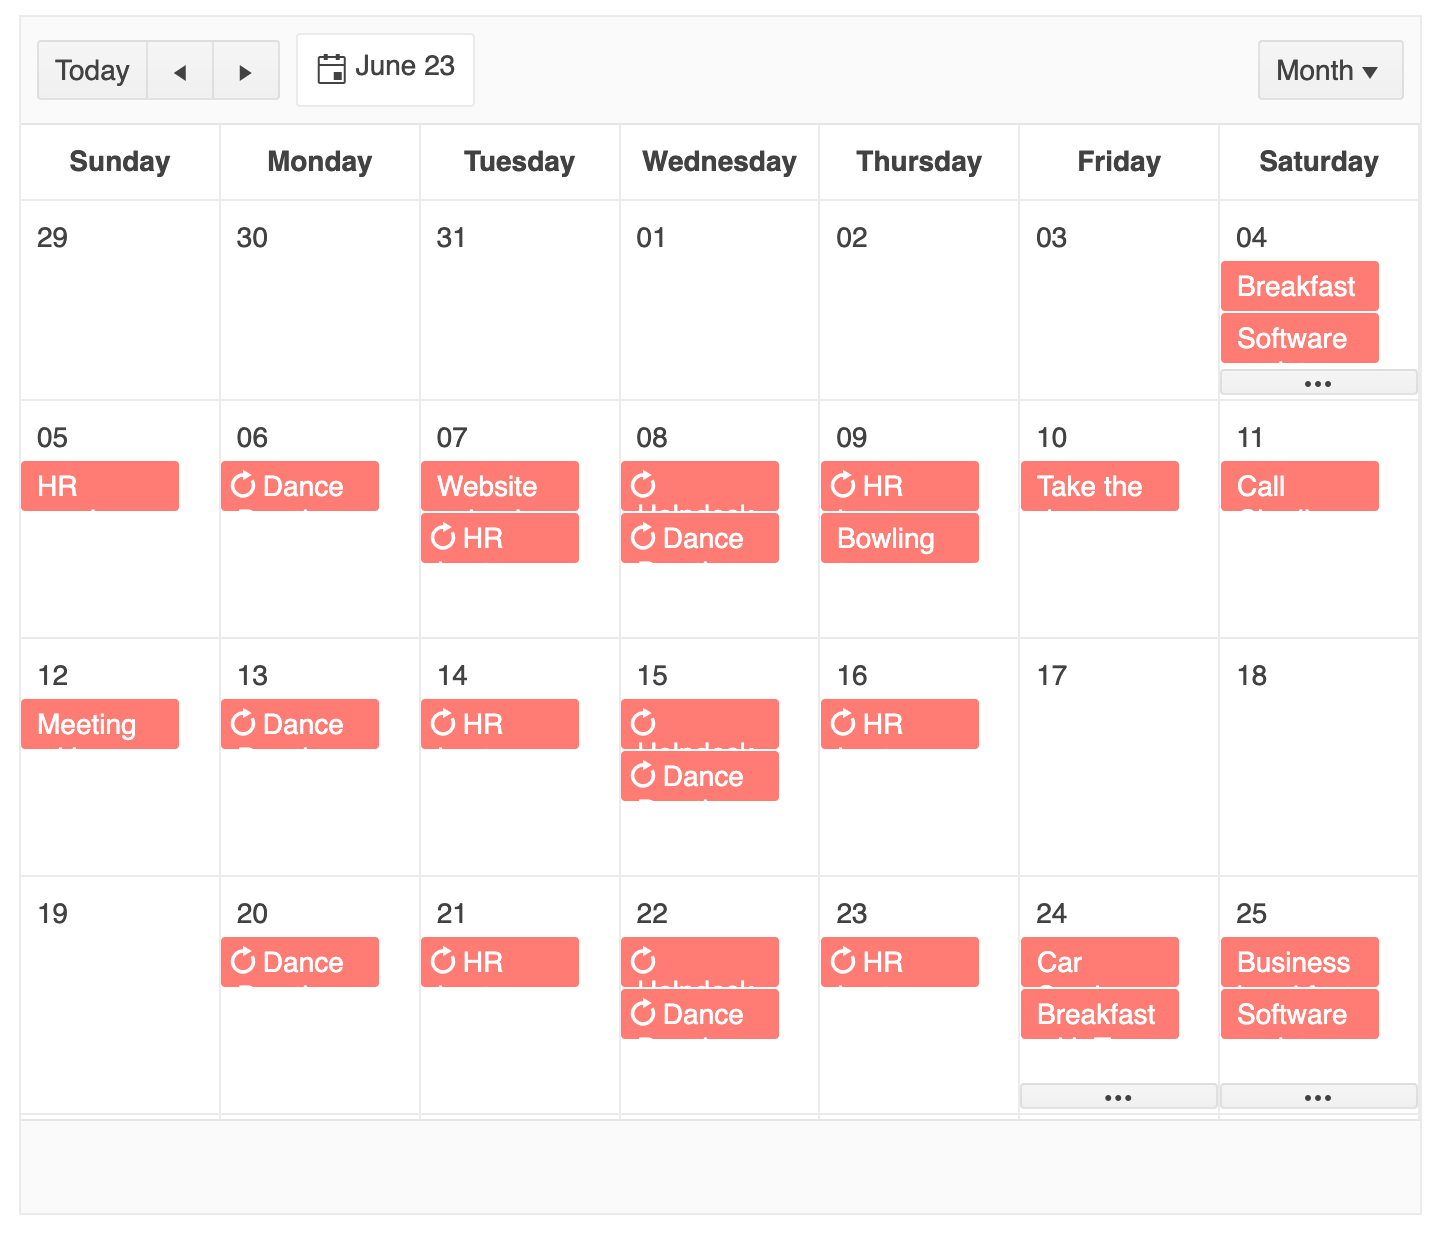 KendoReact Scheduler Component Month View shows month calendar with events